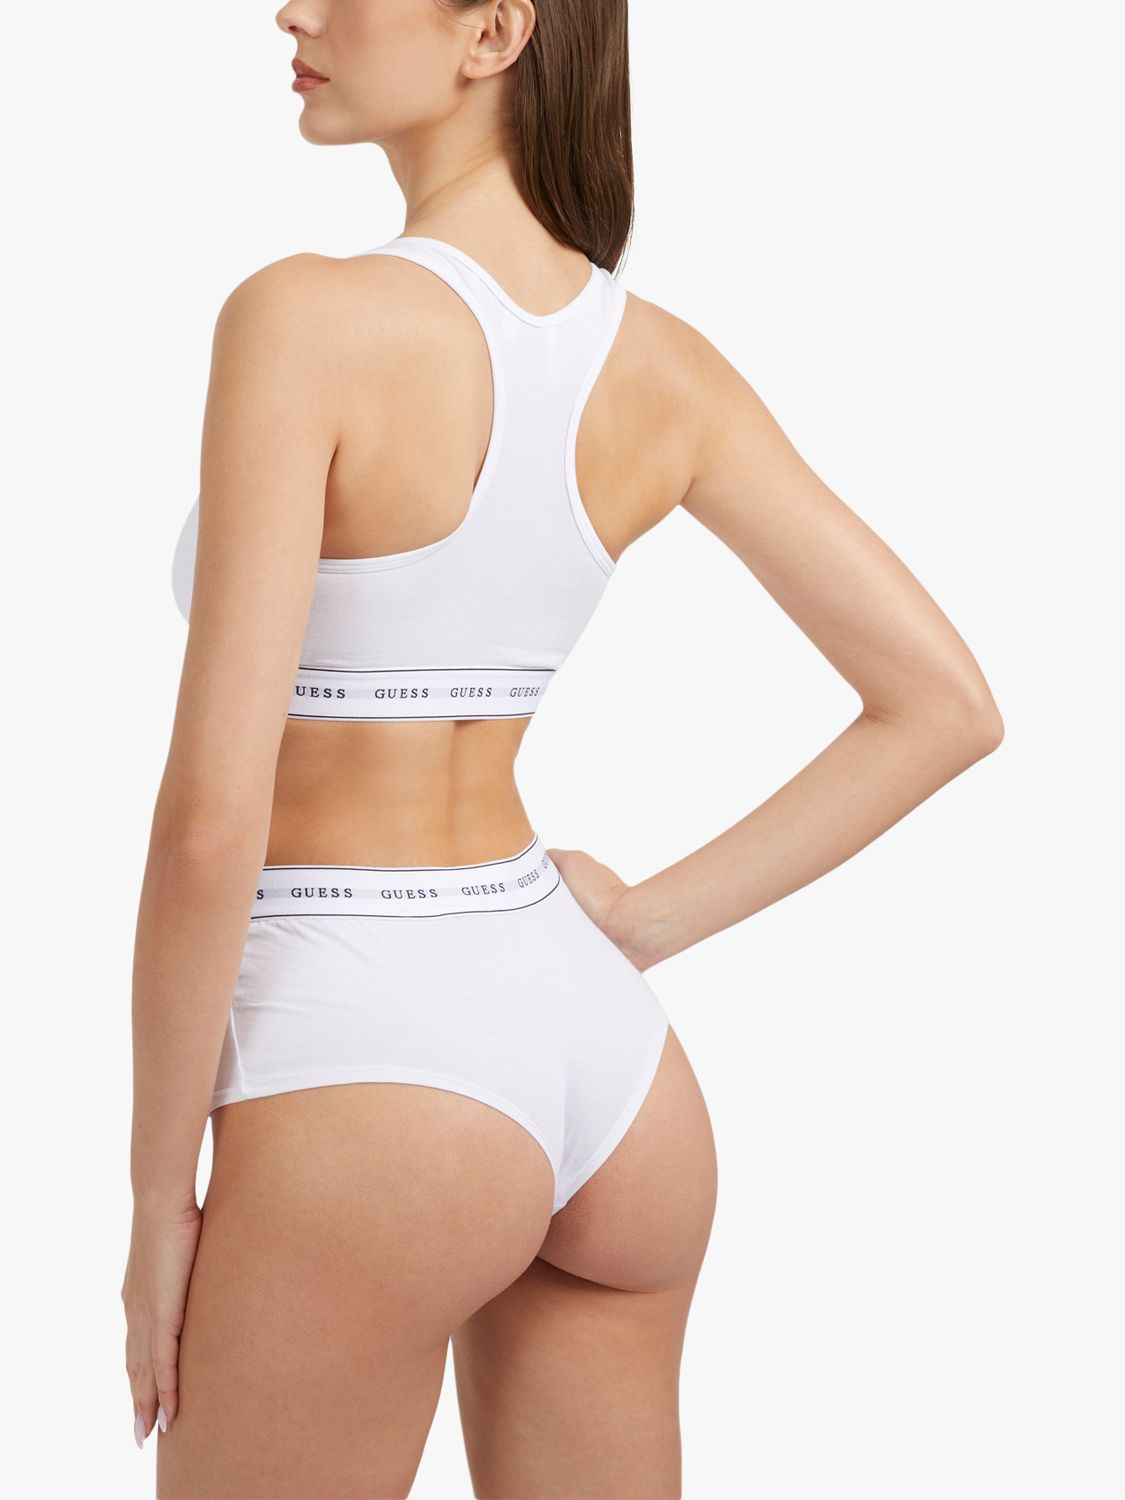 GUESS Carrie Culotte Knickers, Pure White, XS